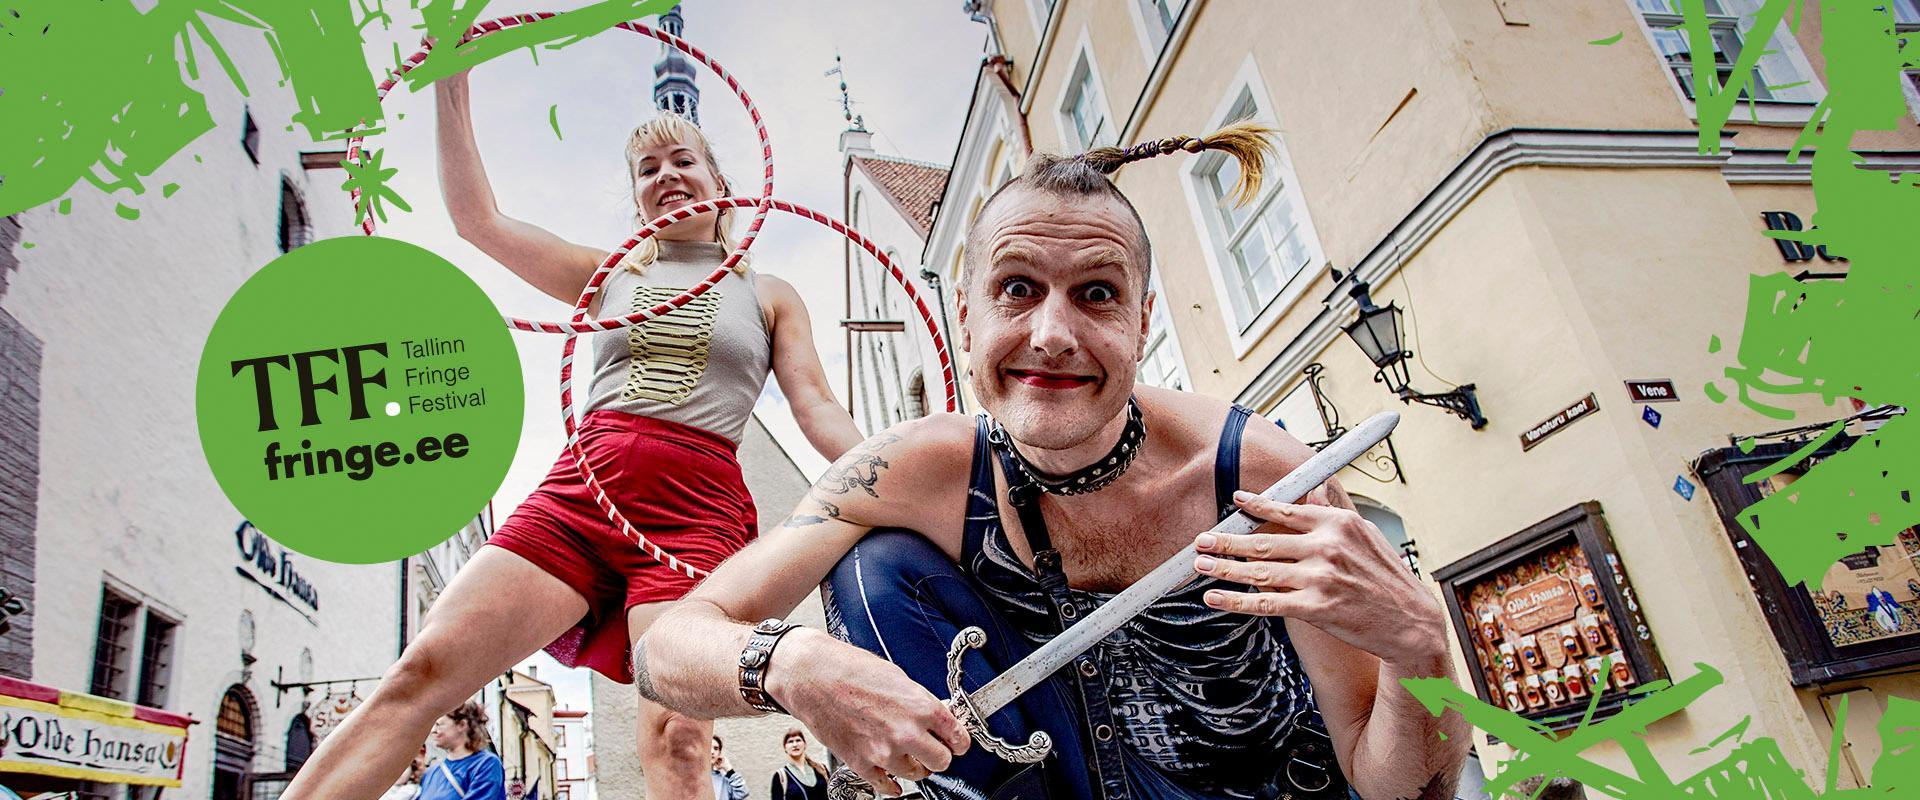 The Tallinn Fringe Festival is an annual open-access arts festival that brings together a wide range of international and local artists in various ven